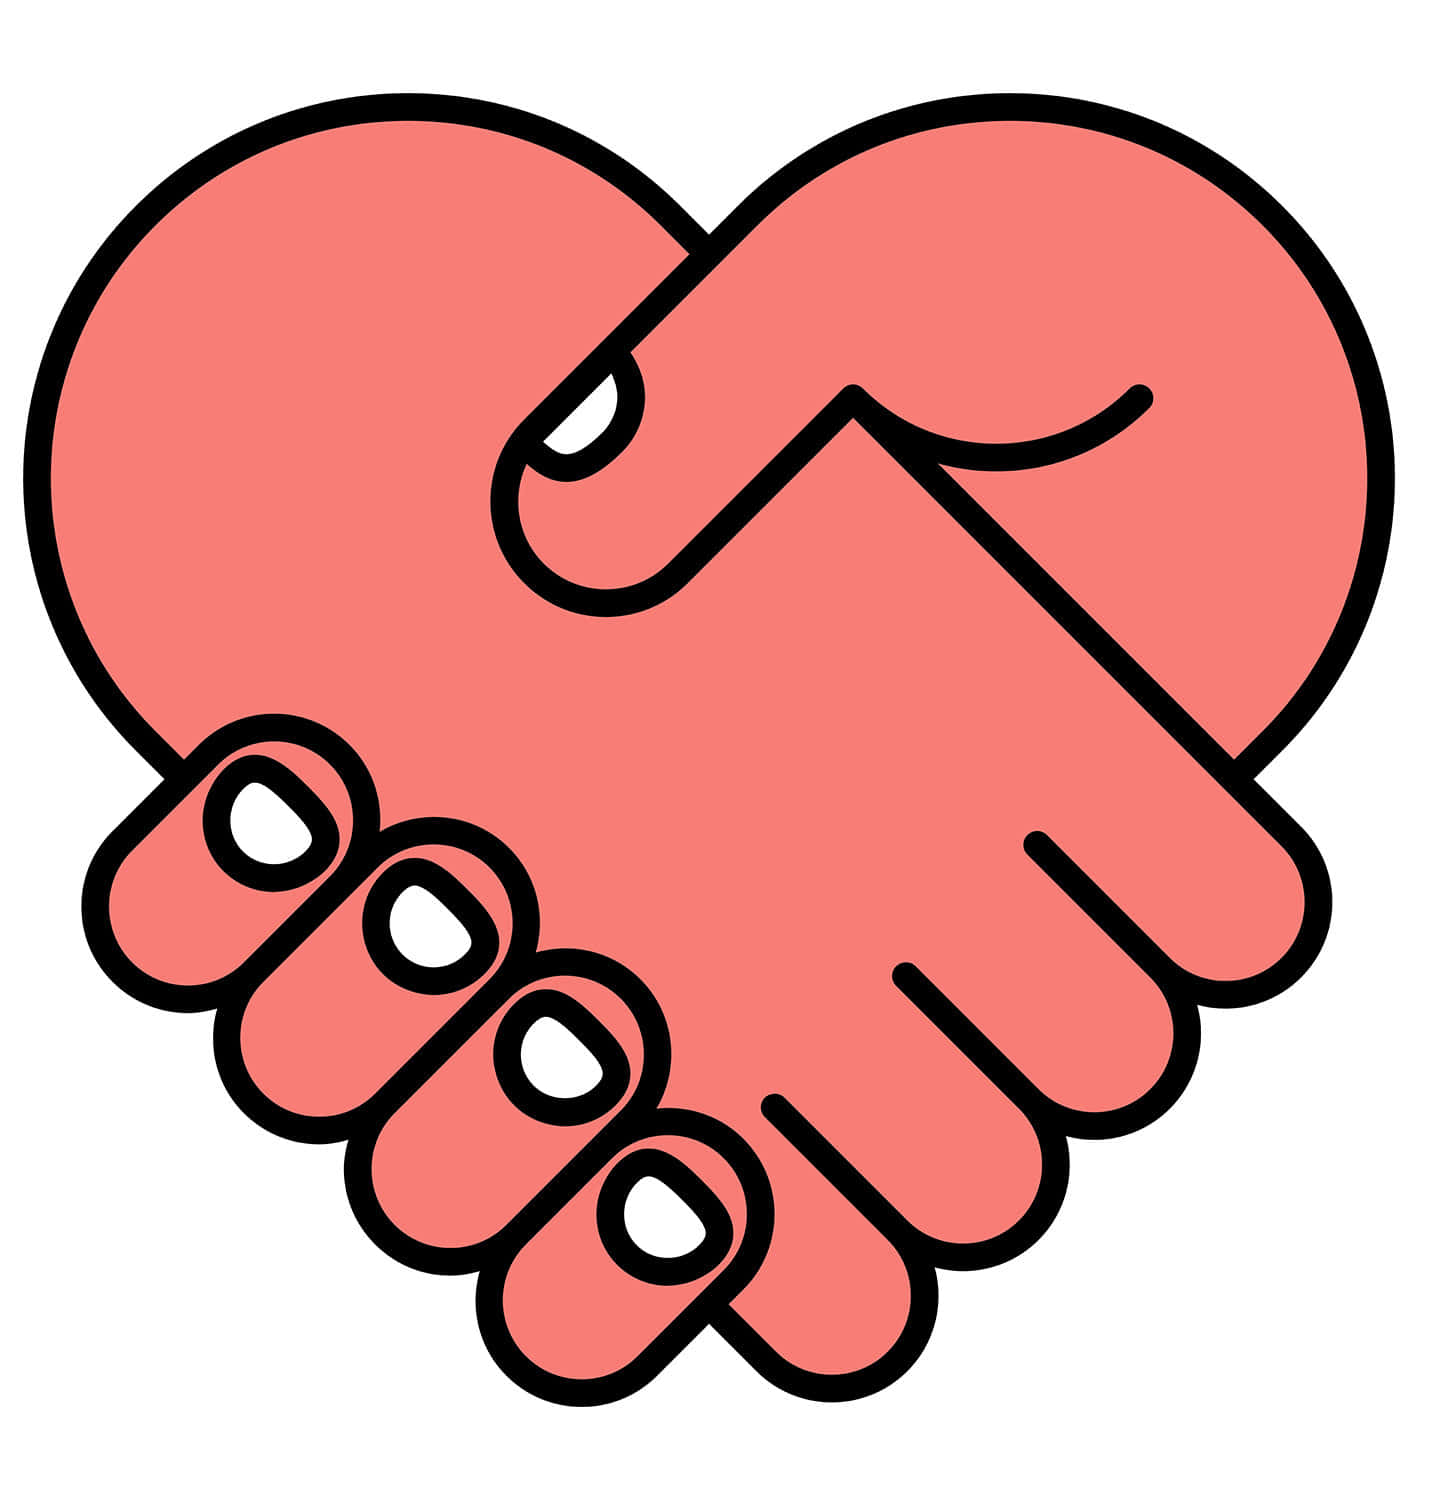 A Handshake With A Heart Icon